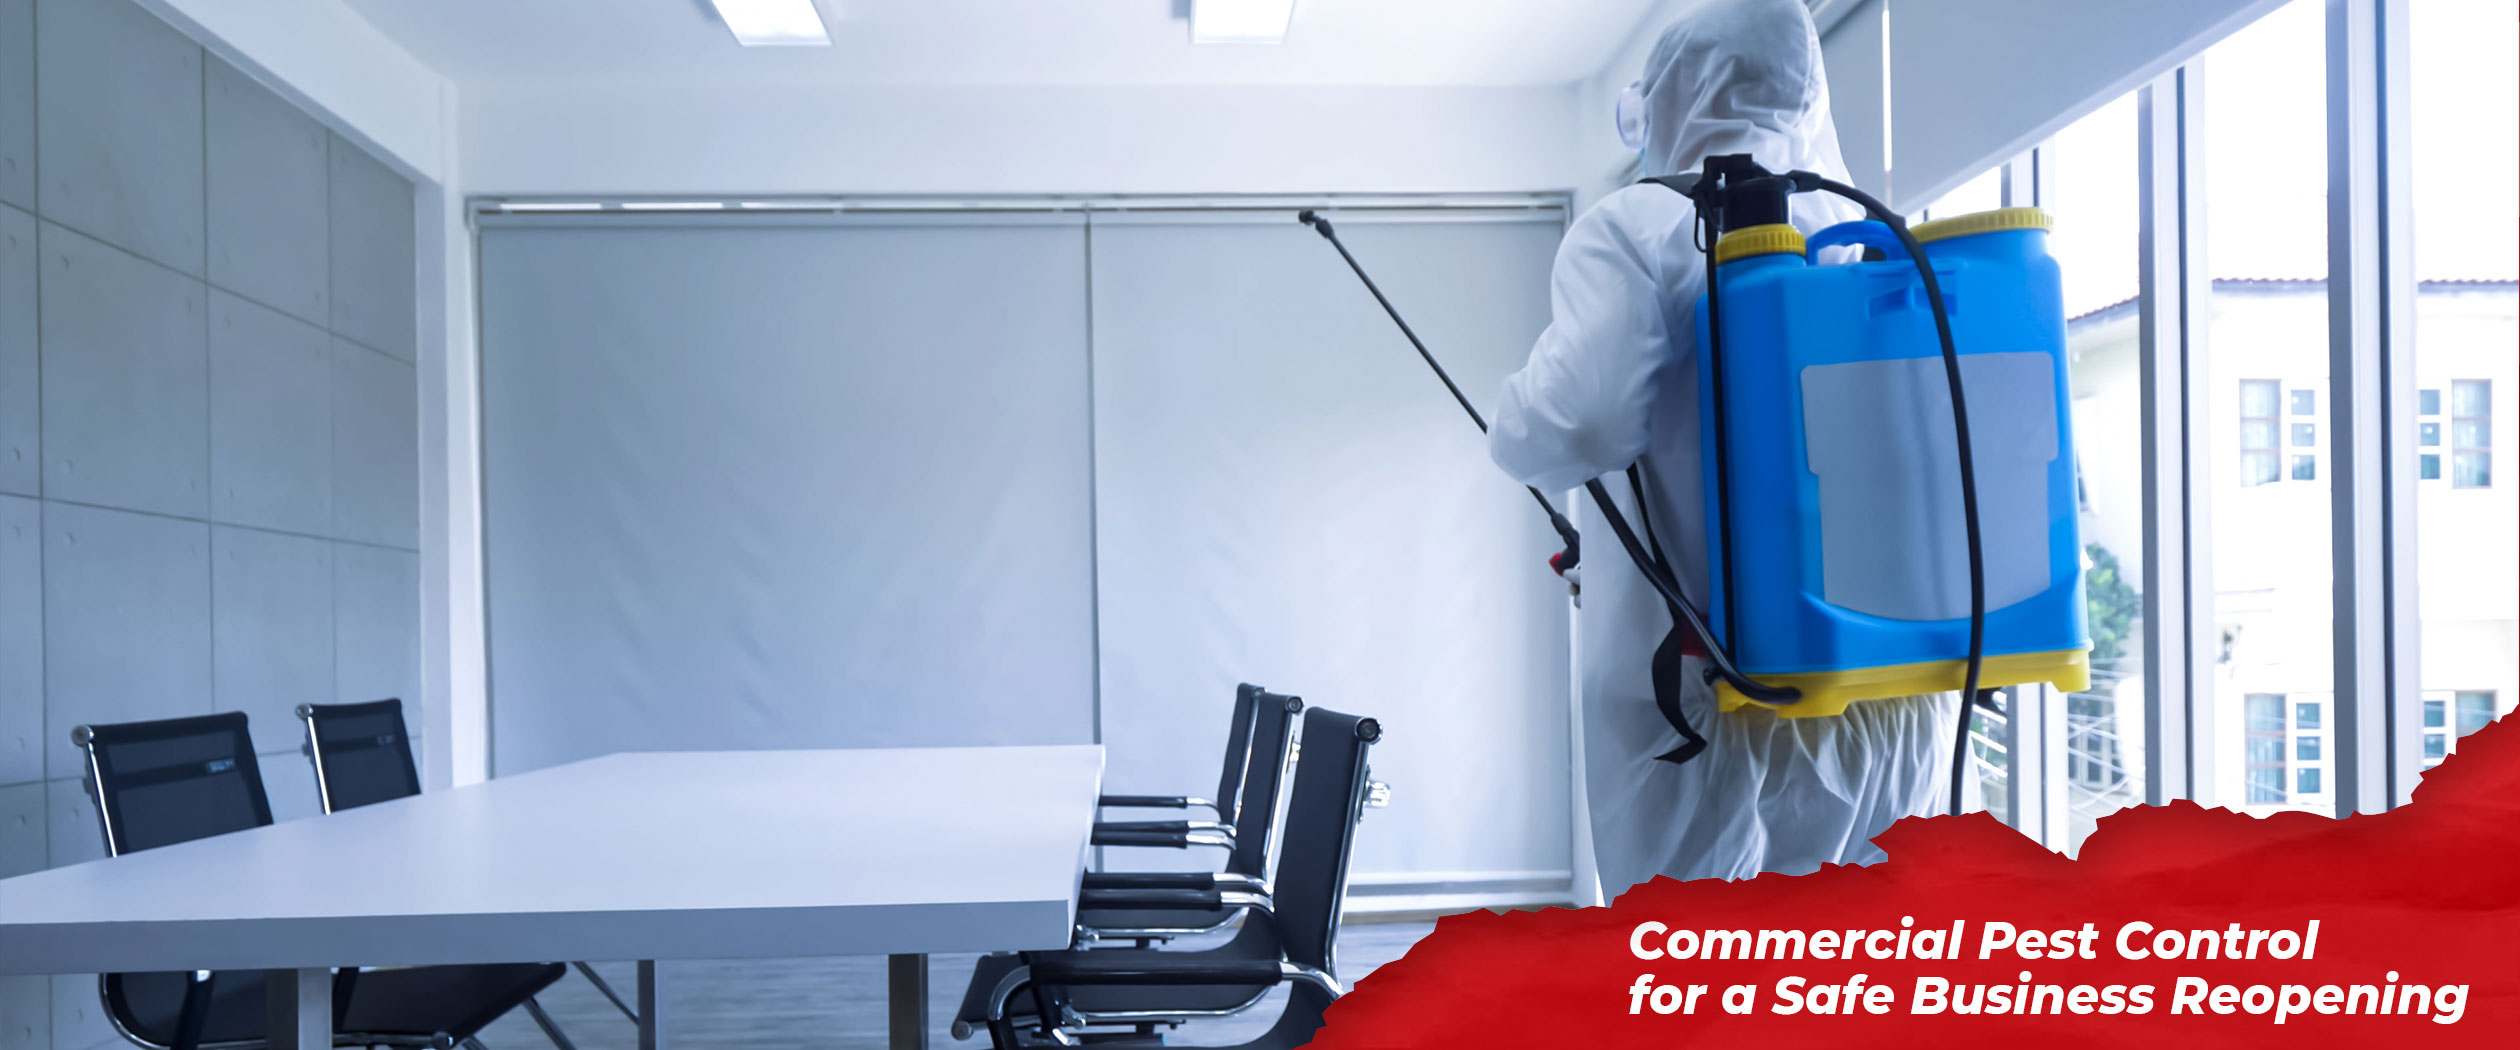 commercial-pest-control-for-a-safe-business-reopening-in-malaysia